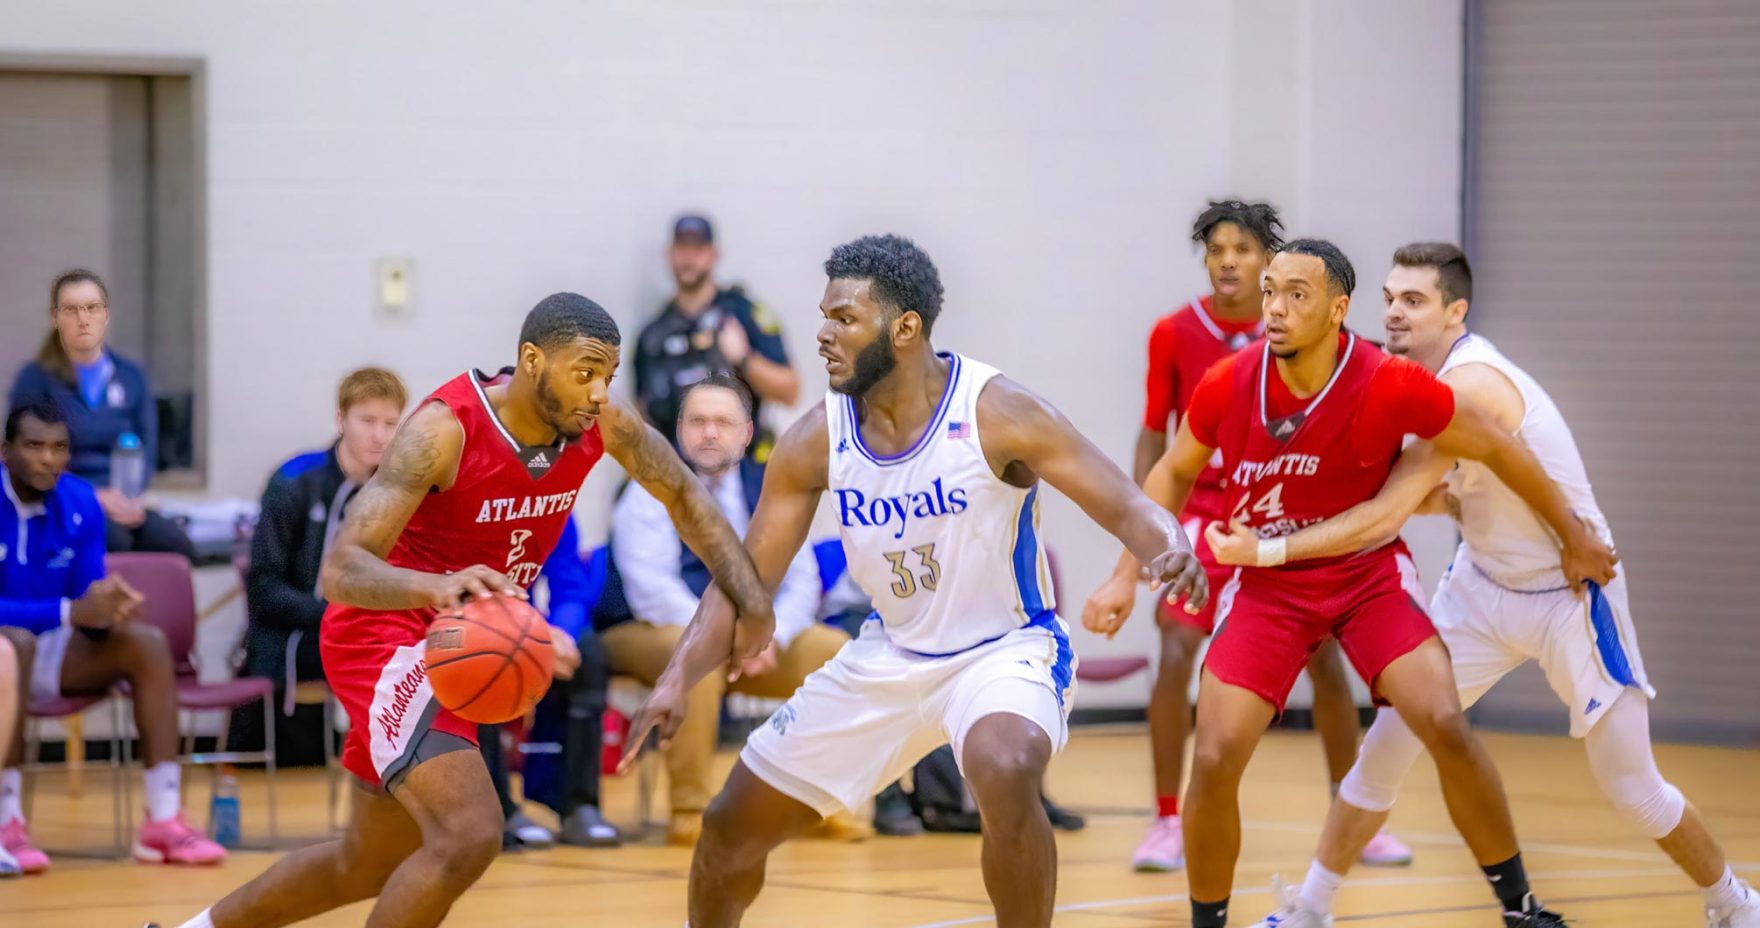 A Photo of Regent Basketball playing in a game: Regent University Accepted into NCAA Exploratory Year for NCAA division 3.